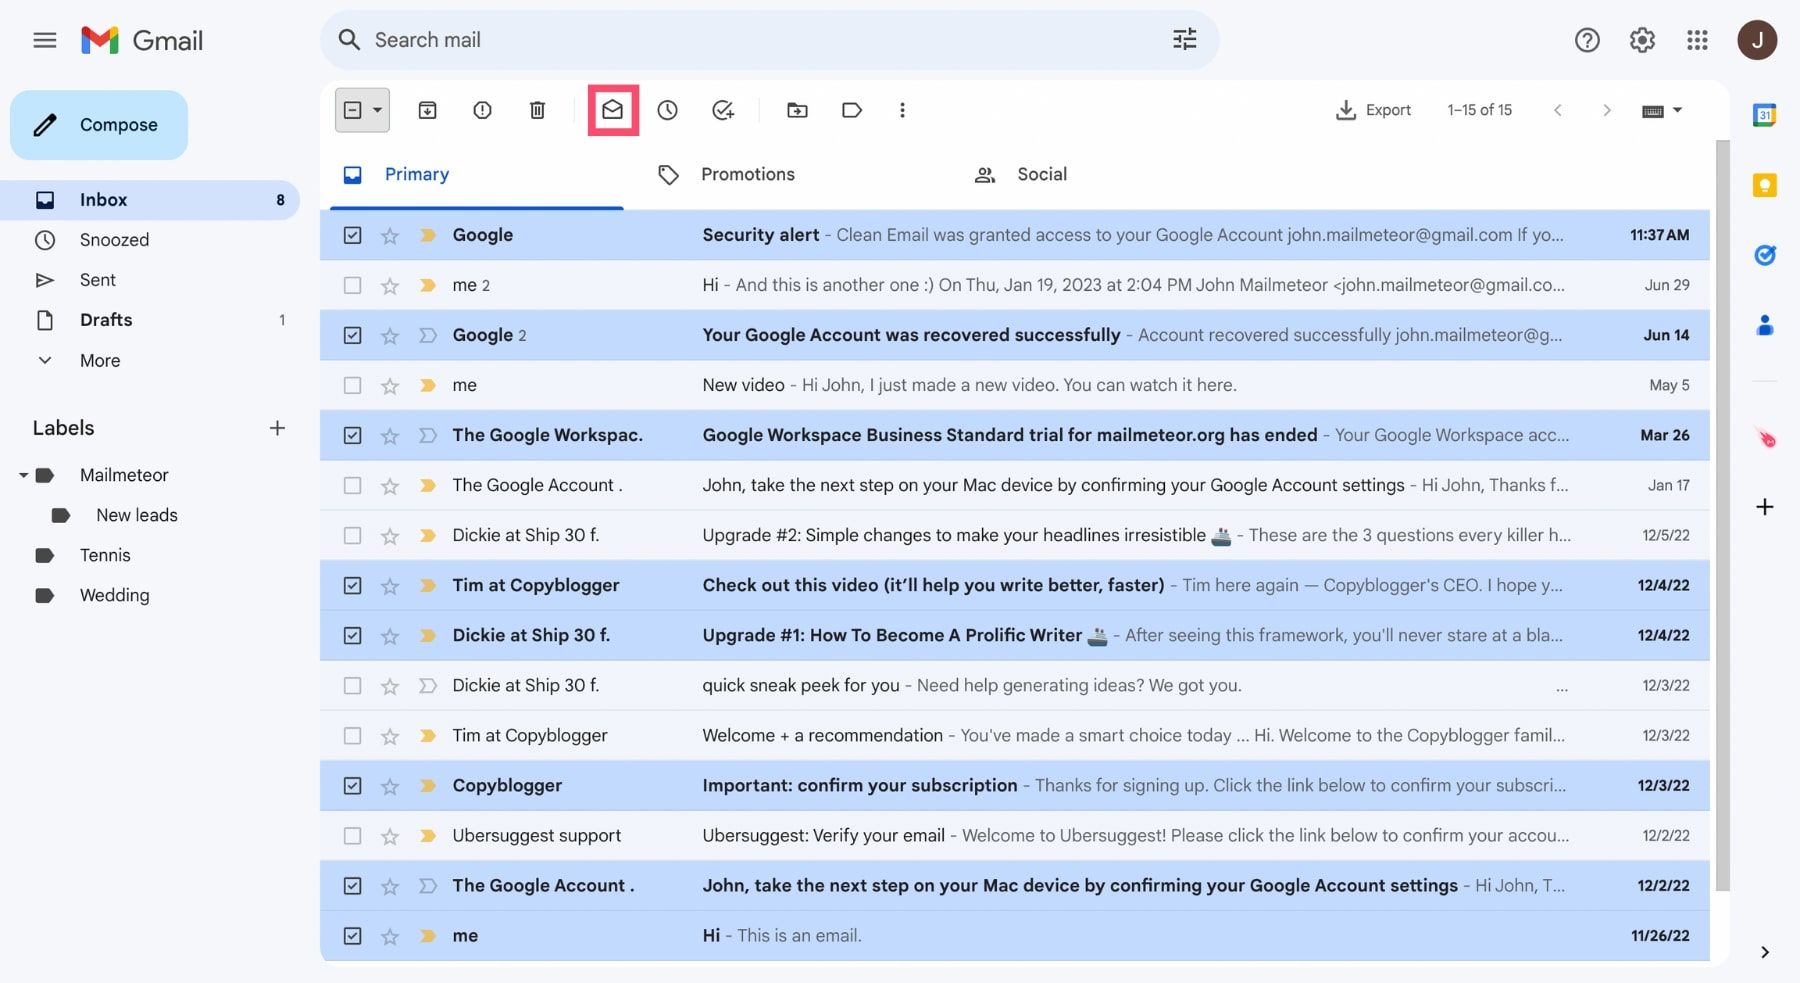 Open emails in Gmail